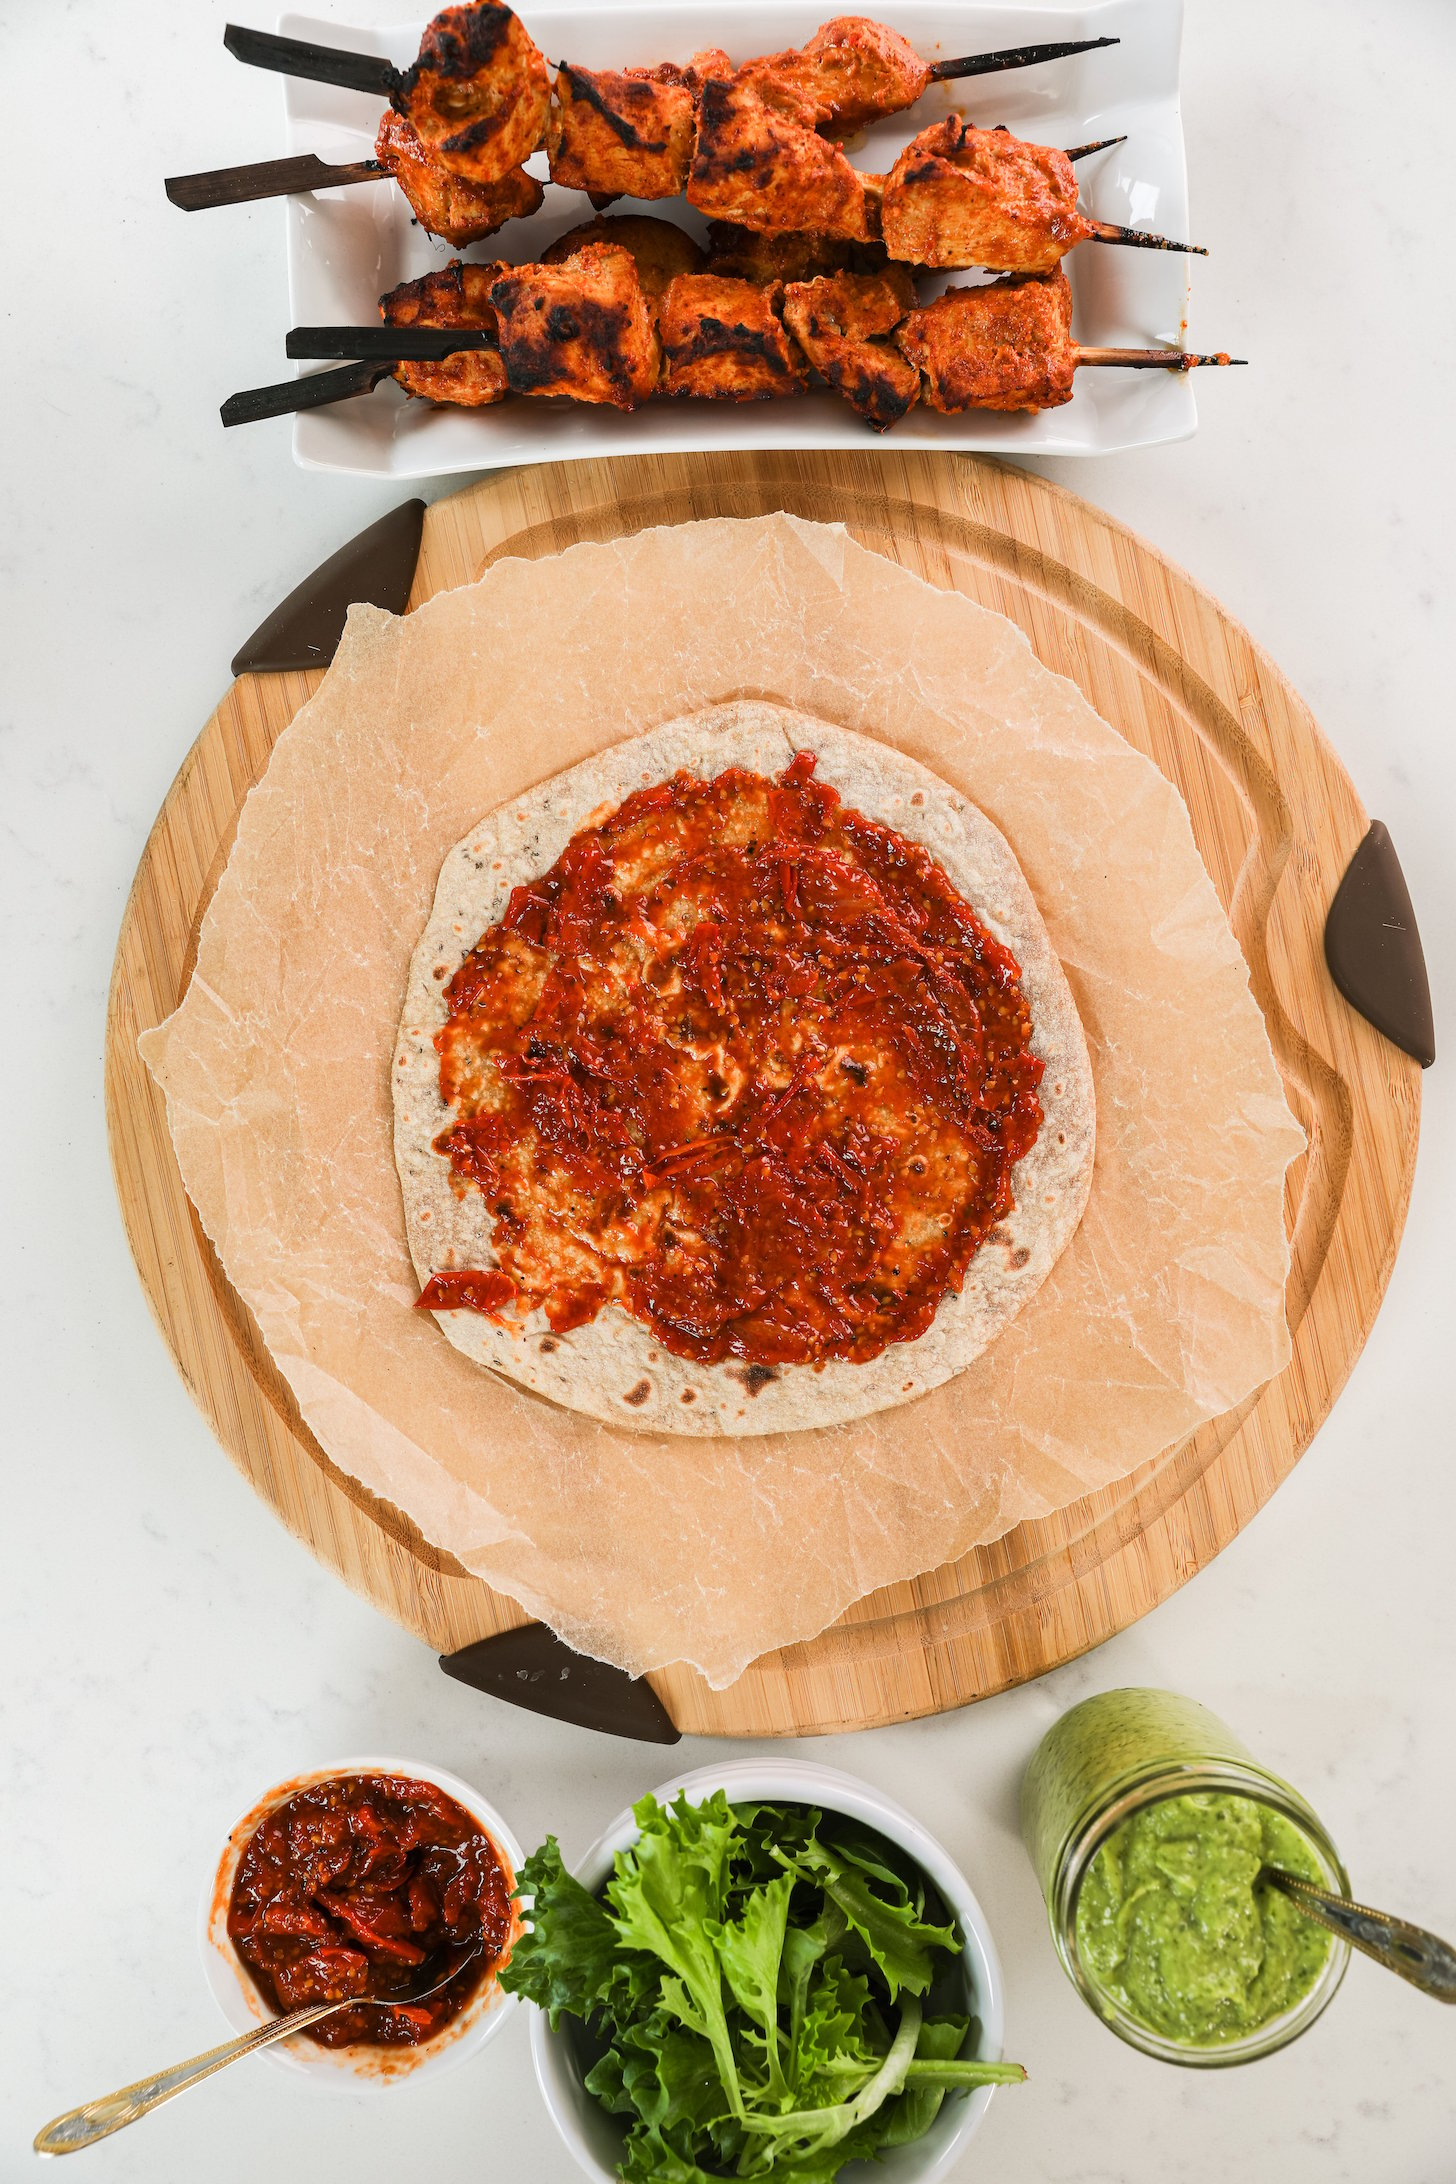 A roti spread with tomato sauce with tandoori chicken skewers, sauces and salad greens nearby.